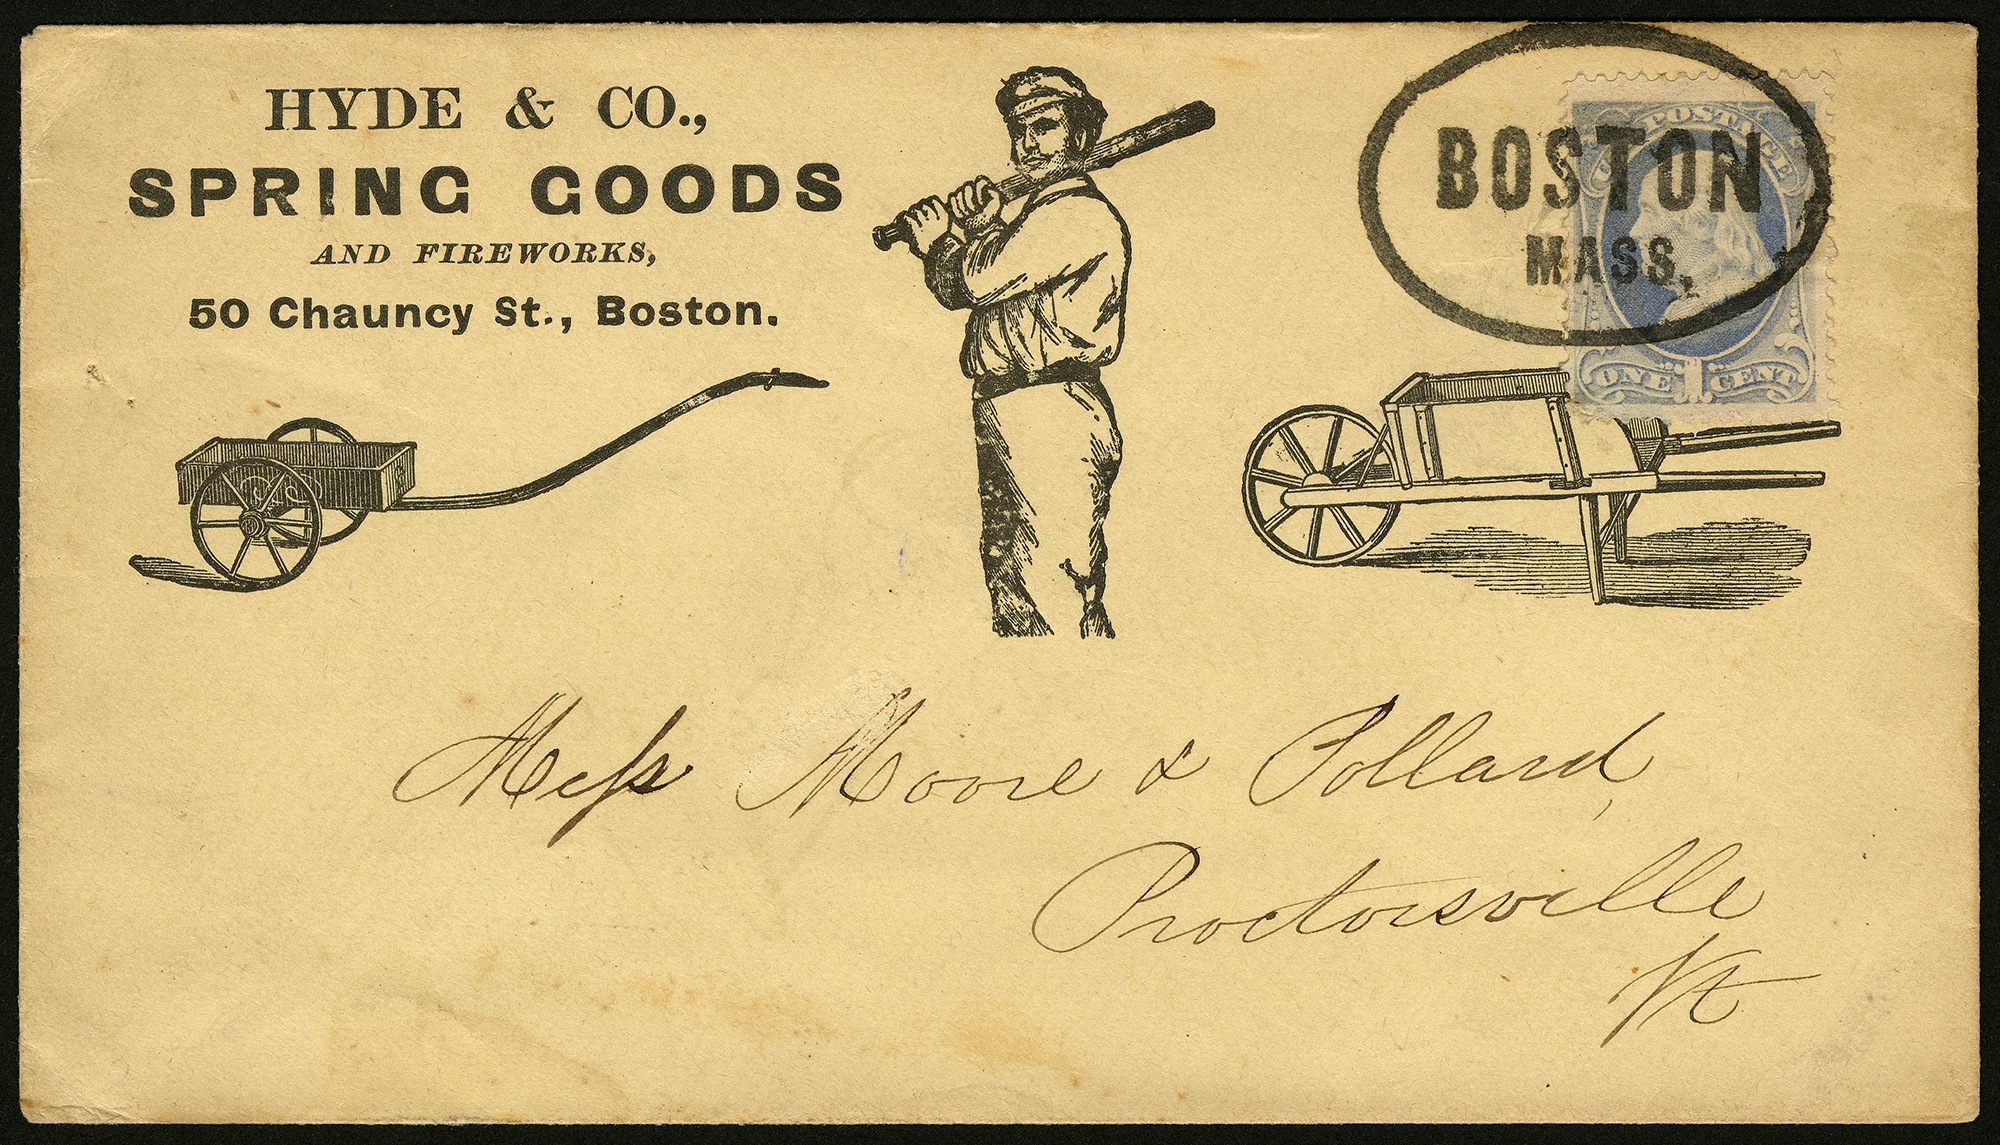 Baseball equipment illustrated advertising cover with BOSTON/ MASS. oval cancel, addressed to Mess. Moore and Pollard Proctorsville, Vermont; images of a two-wheeled cart, baseball player standing with left shoulder in front, and one-wheeled cart